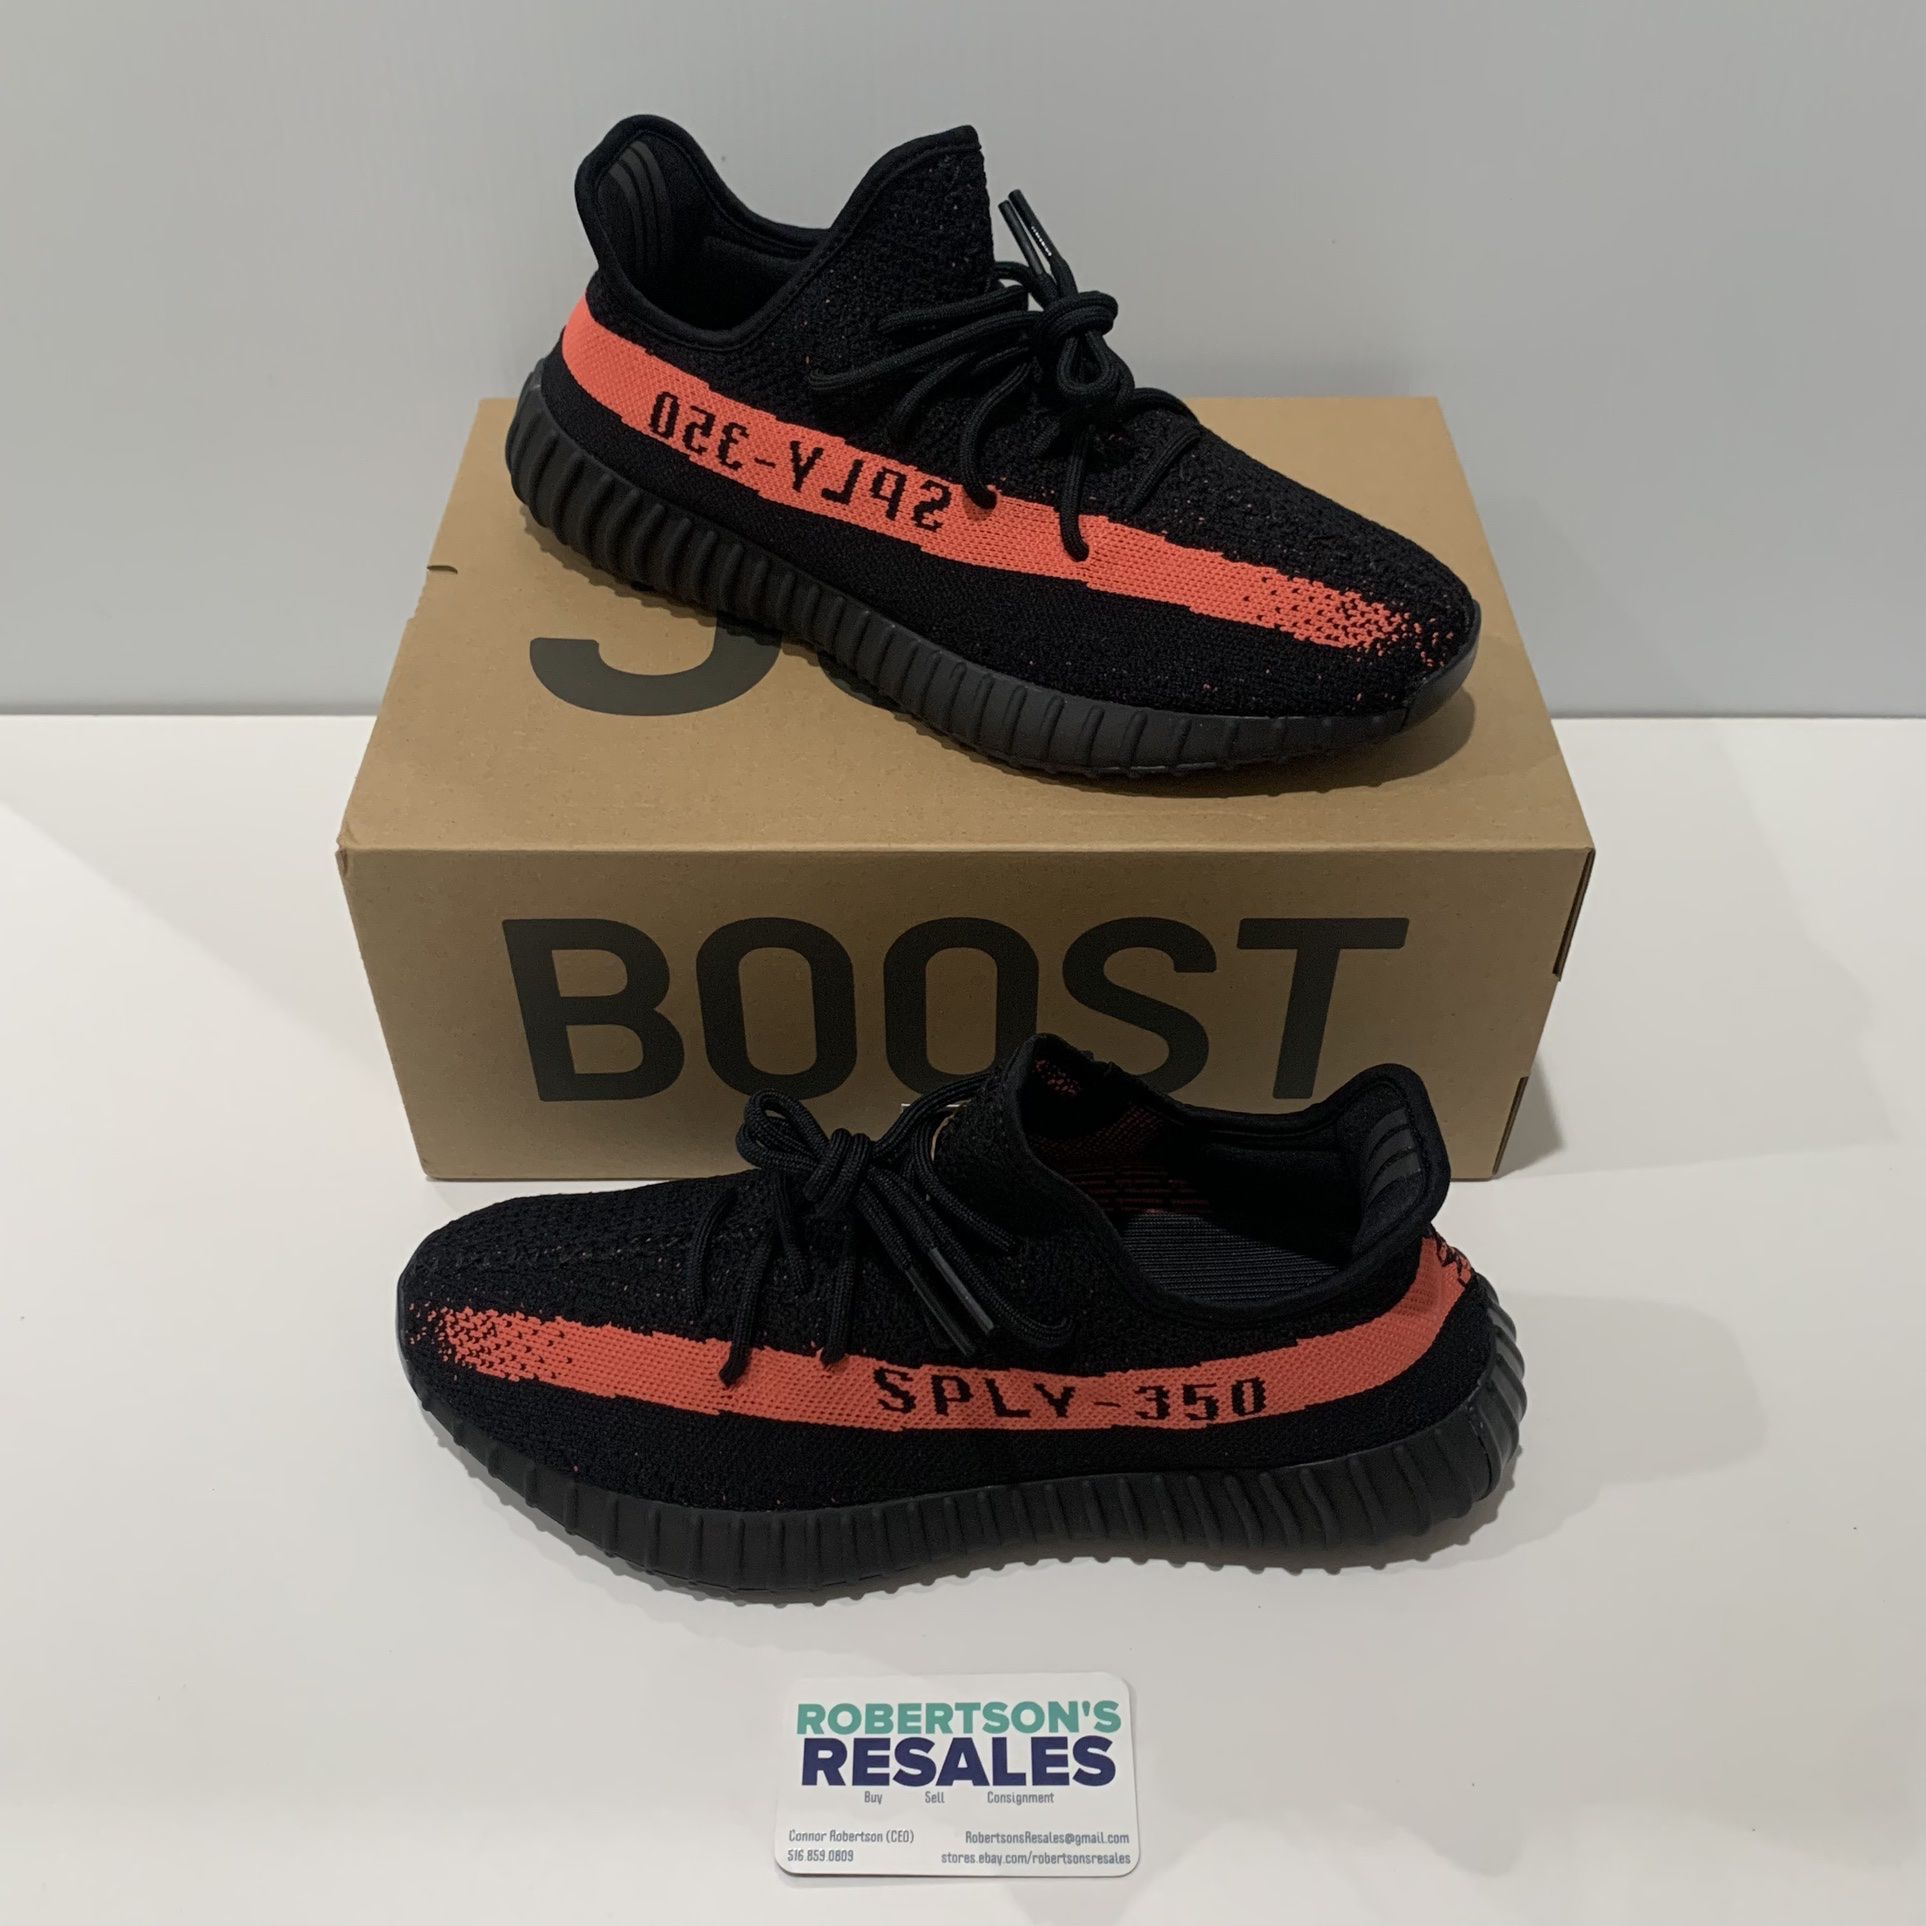 Adidas Yeezy Boost 350 V2 Core Black Team Red Athletic Shoes for Sale in  Orlando, FL - OfferUp